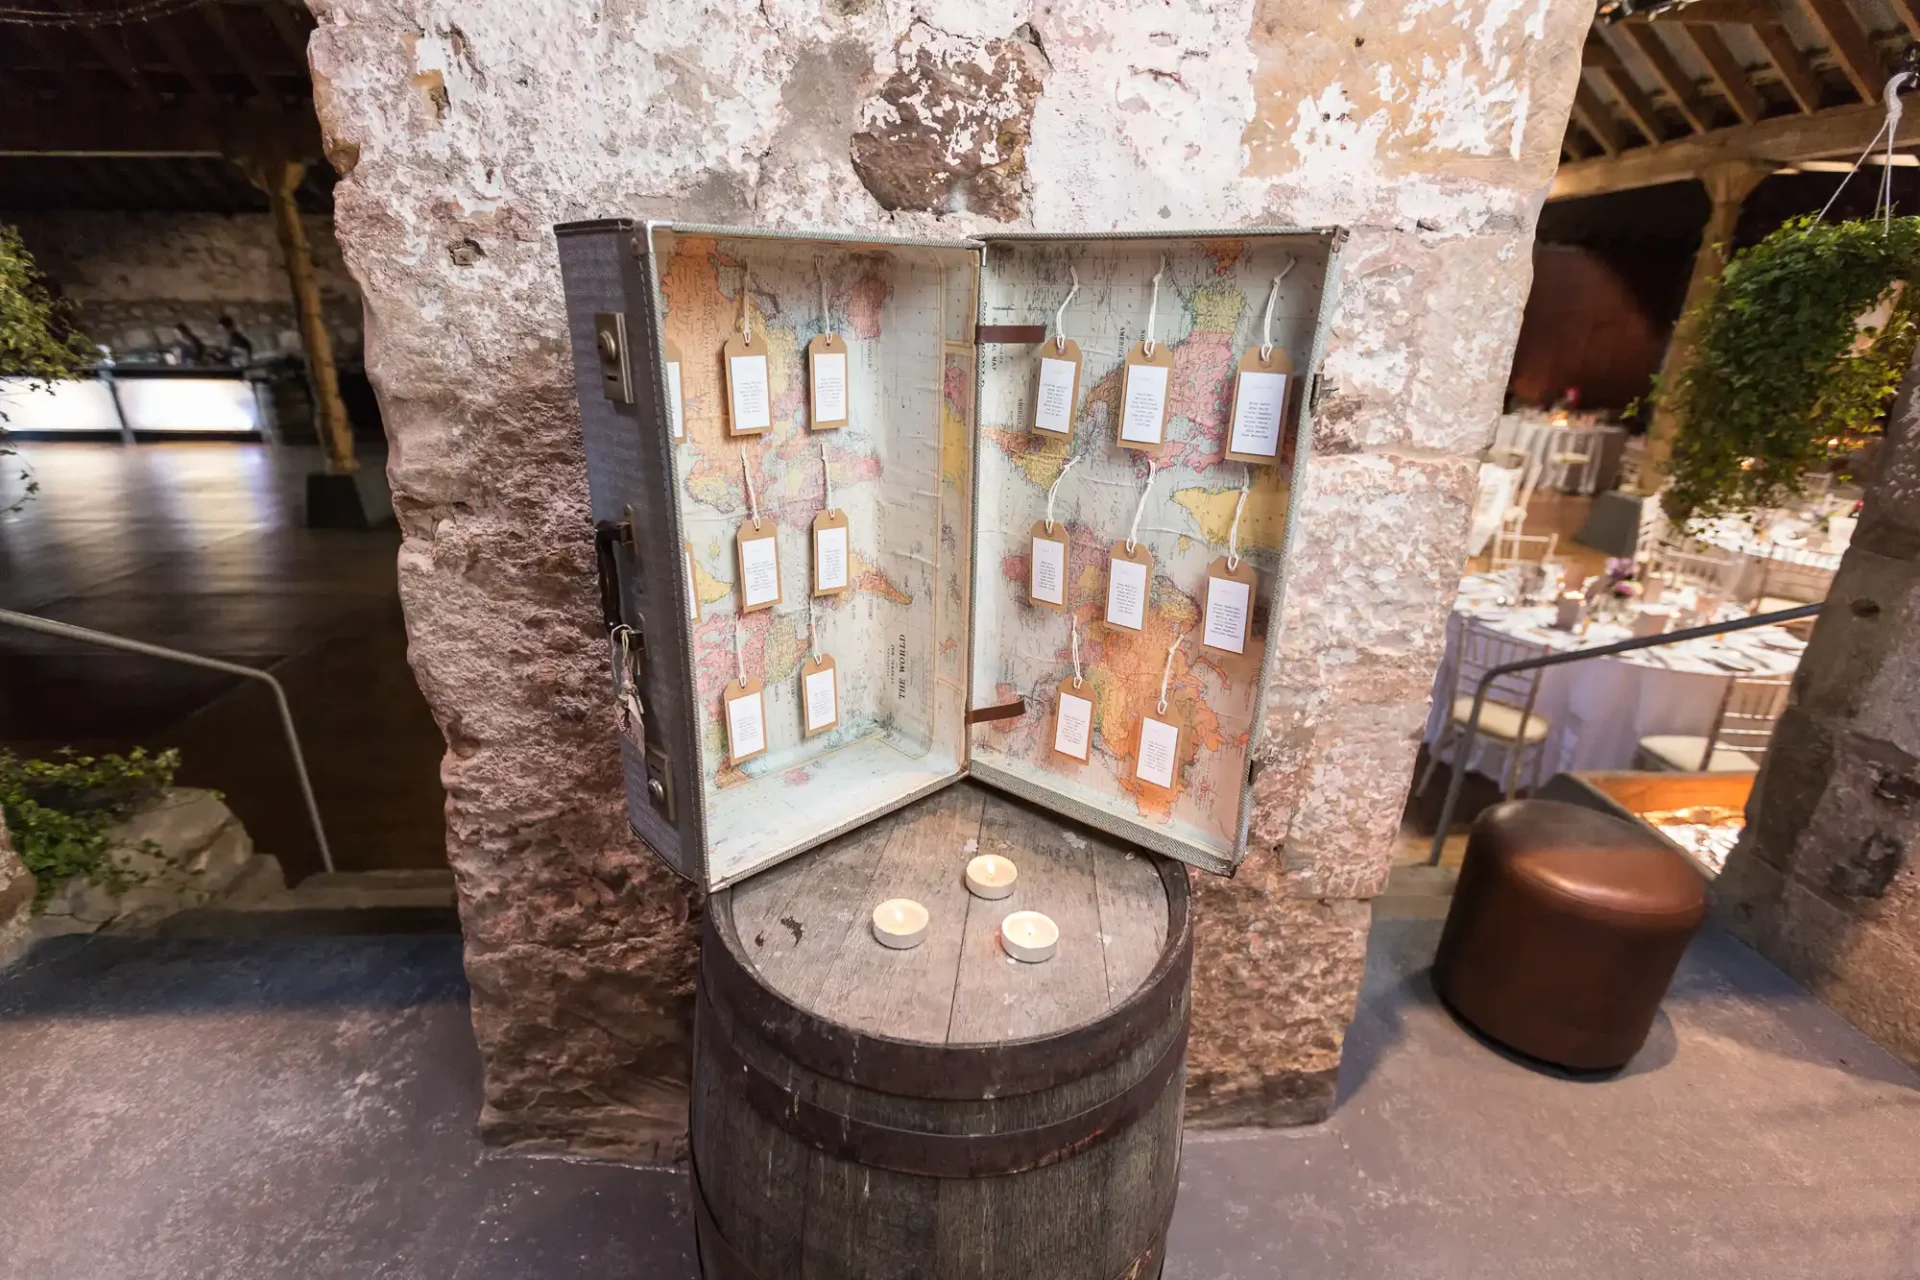 Vintage style open wooden cabinet with maps and pinned notes, displayed on a wooden barrel in a rustic room setting.